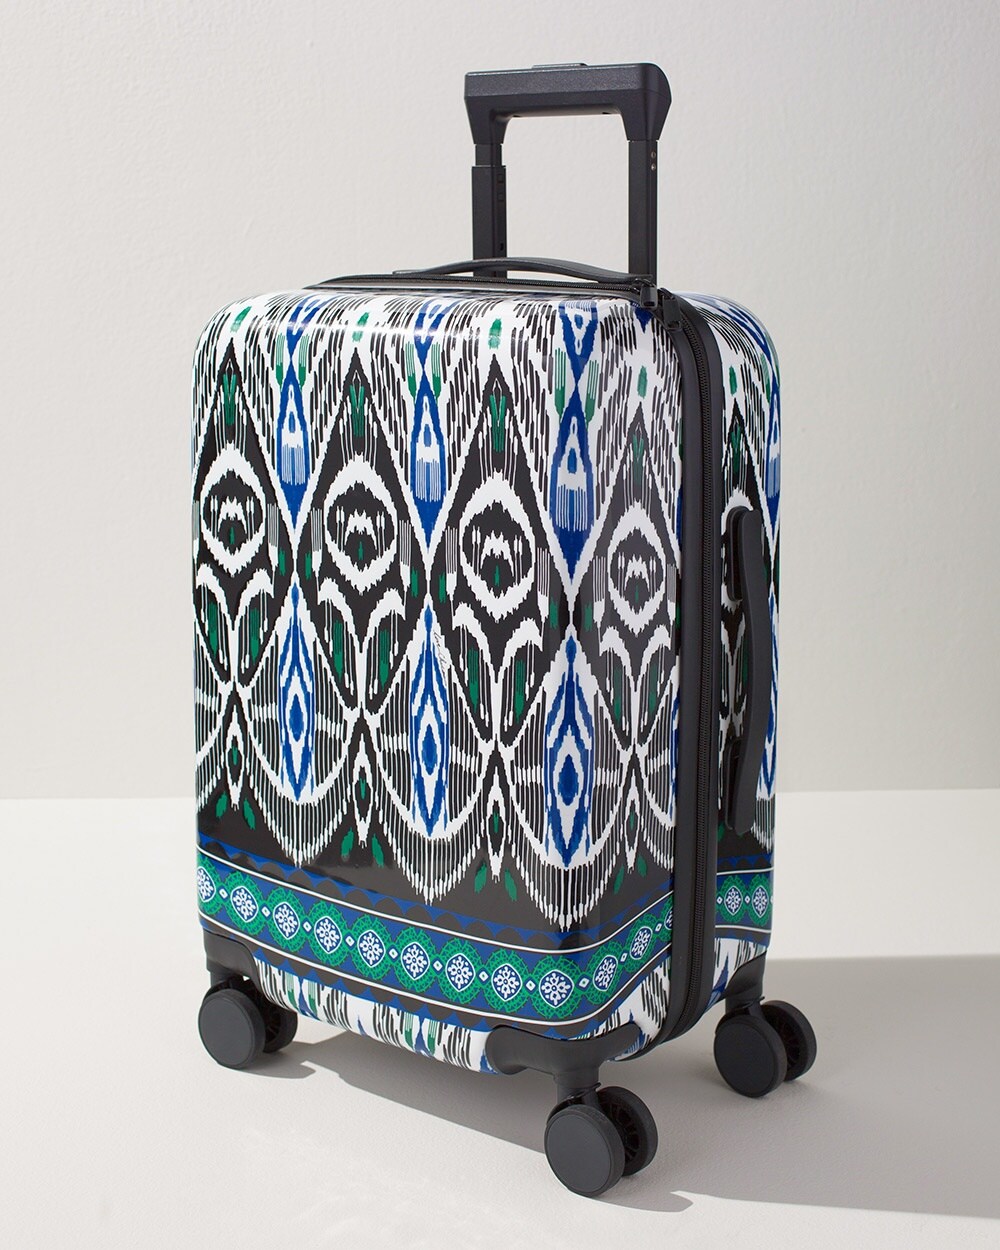 40th Anniversary Carry-On Luggage